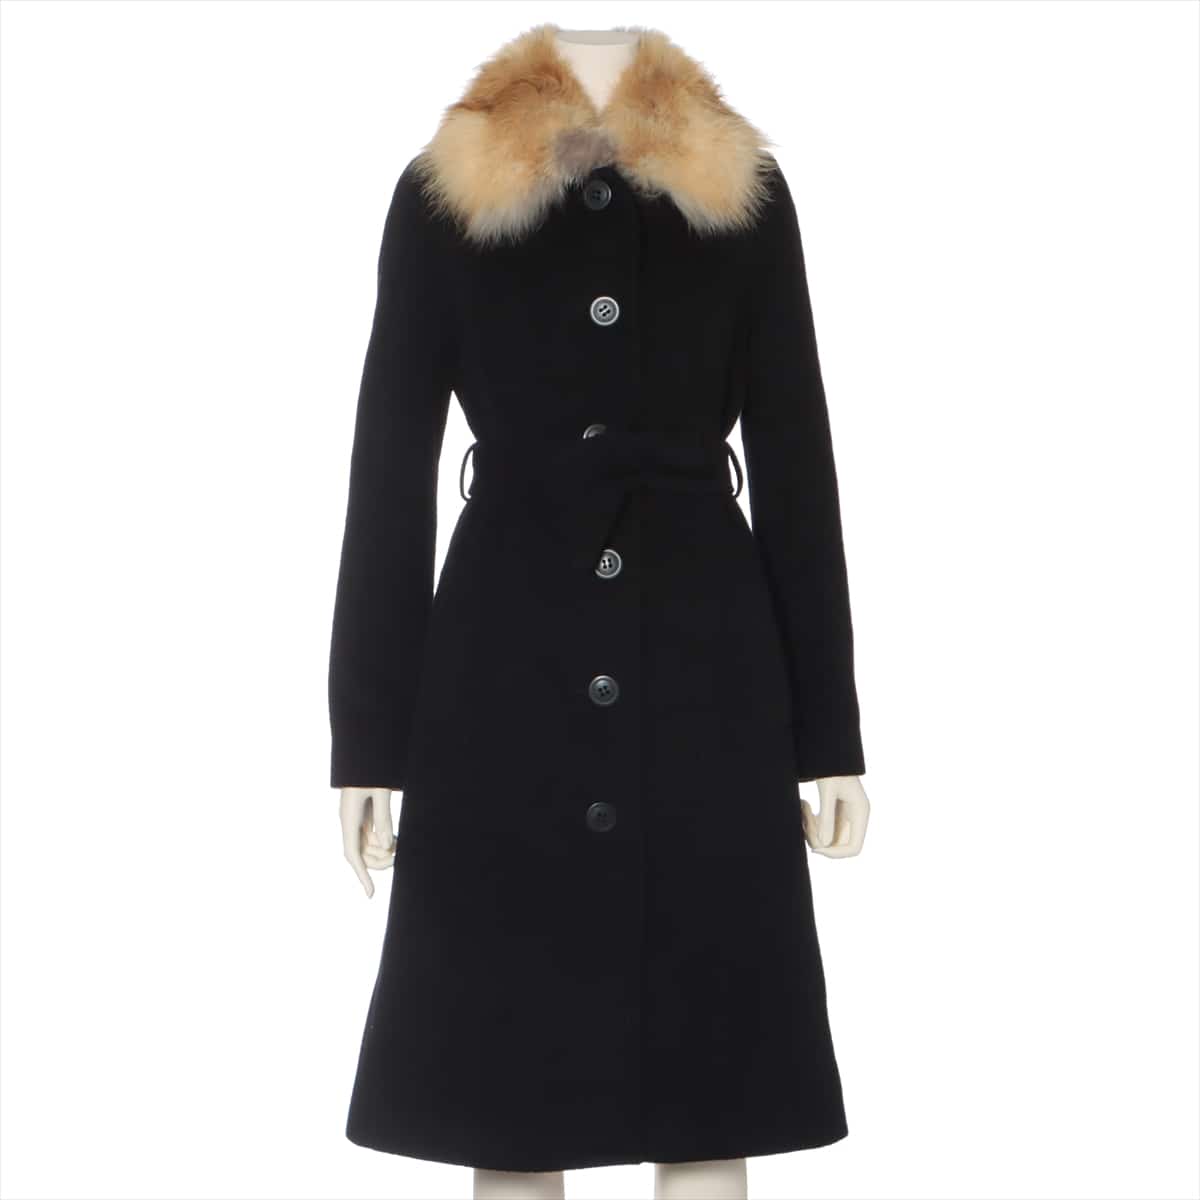 BURBERRY BLUE LABEL Wool Long coat 38 Ladies' Black  Part of the quality tag is printed off